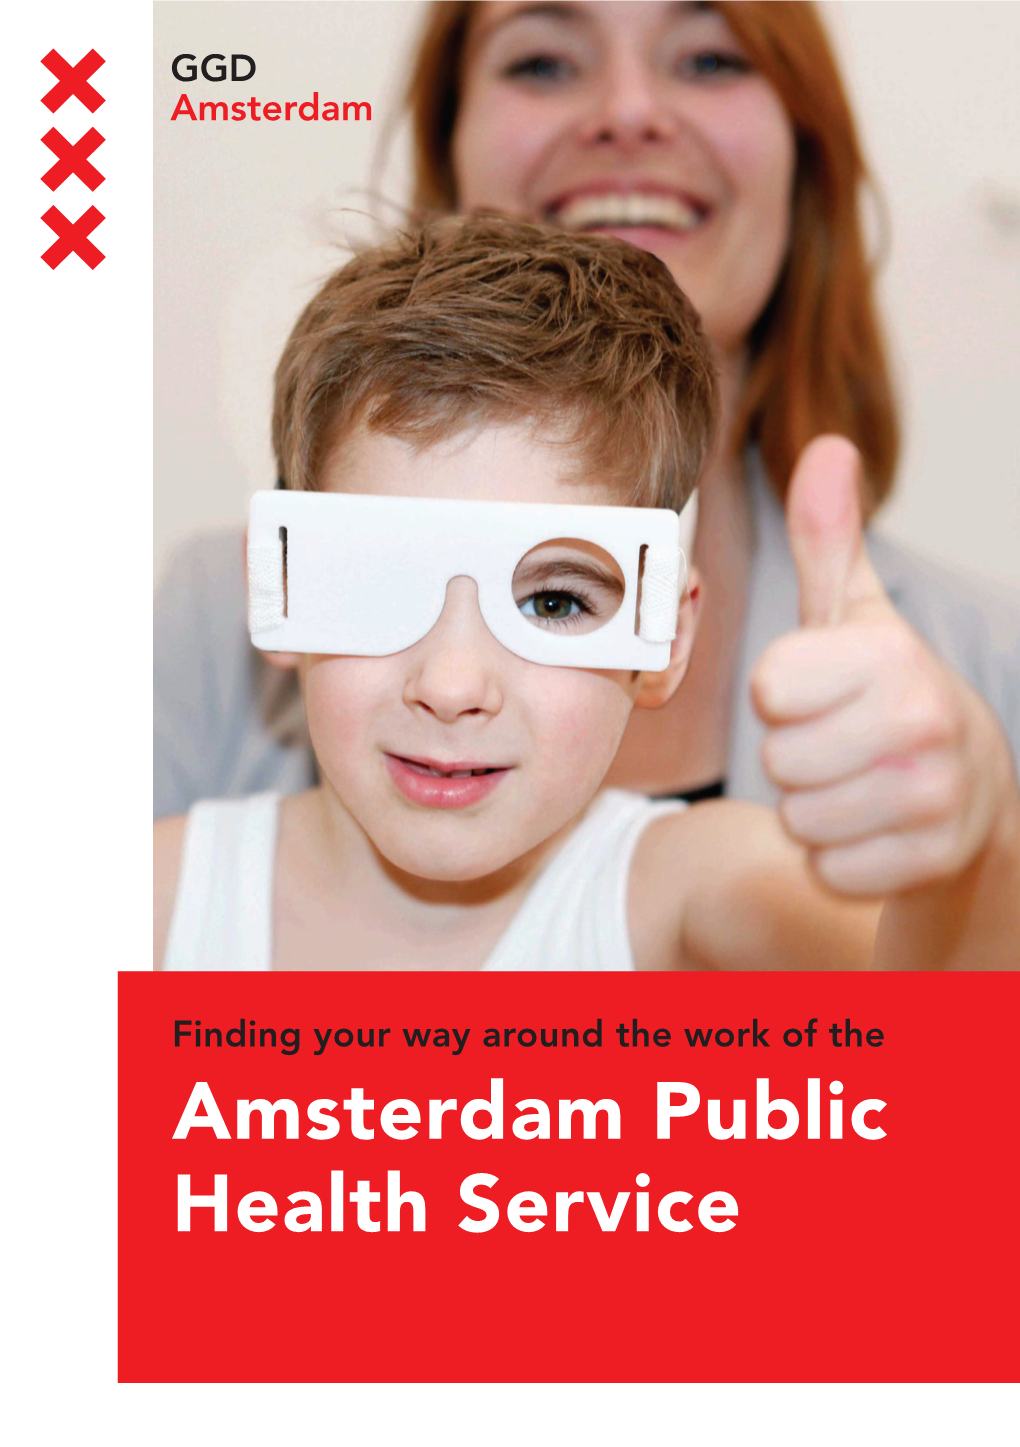 Finding Your Way Around the Work of the Amsterdam Public Health Service 2 Contents